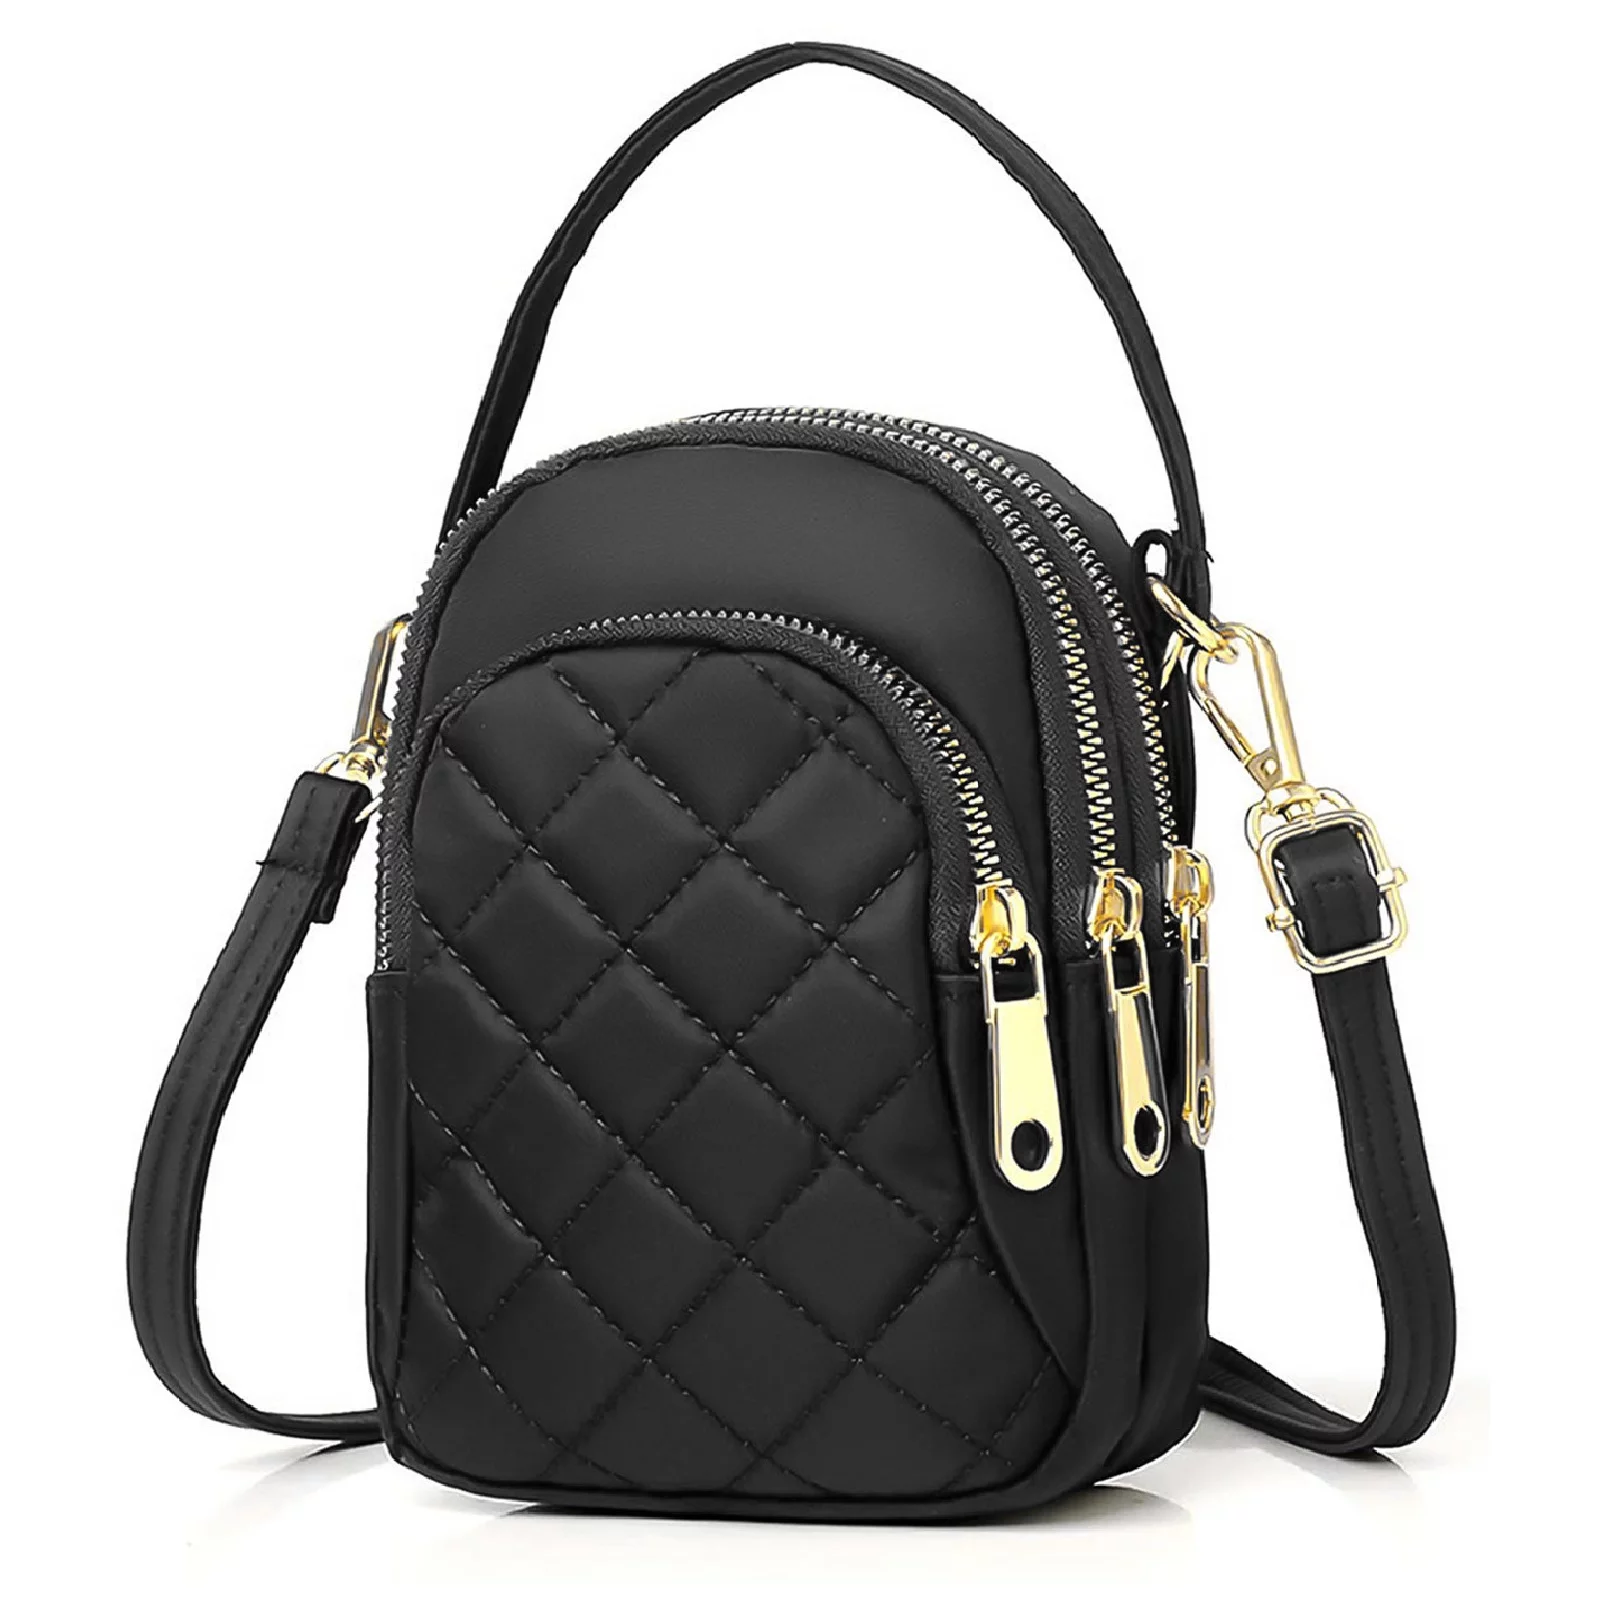 EEEkit Quilted Crossbody Cellphone Bag for Women, Small Phone Handbag with 3 Zipper Pockets and Adjustable Strap